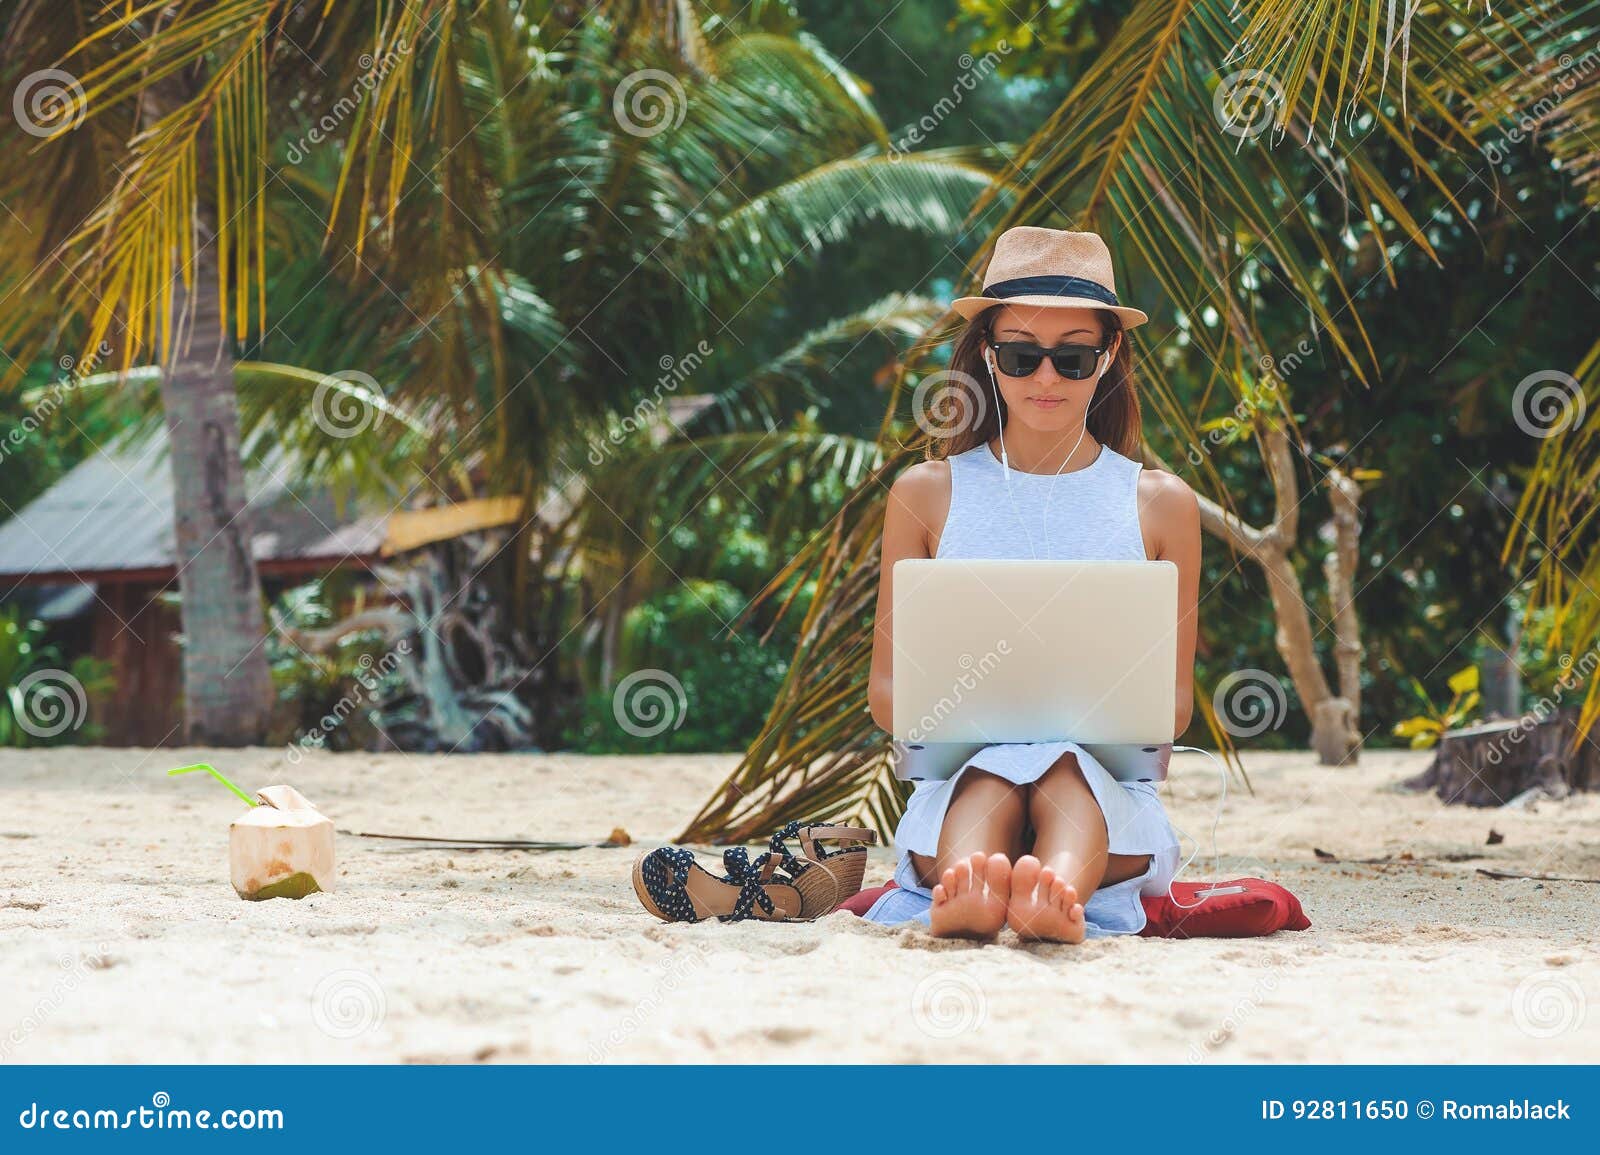 young woman freelancer working in laptop on the beach. freelance work